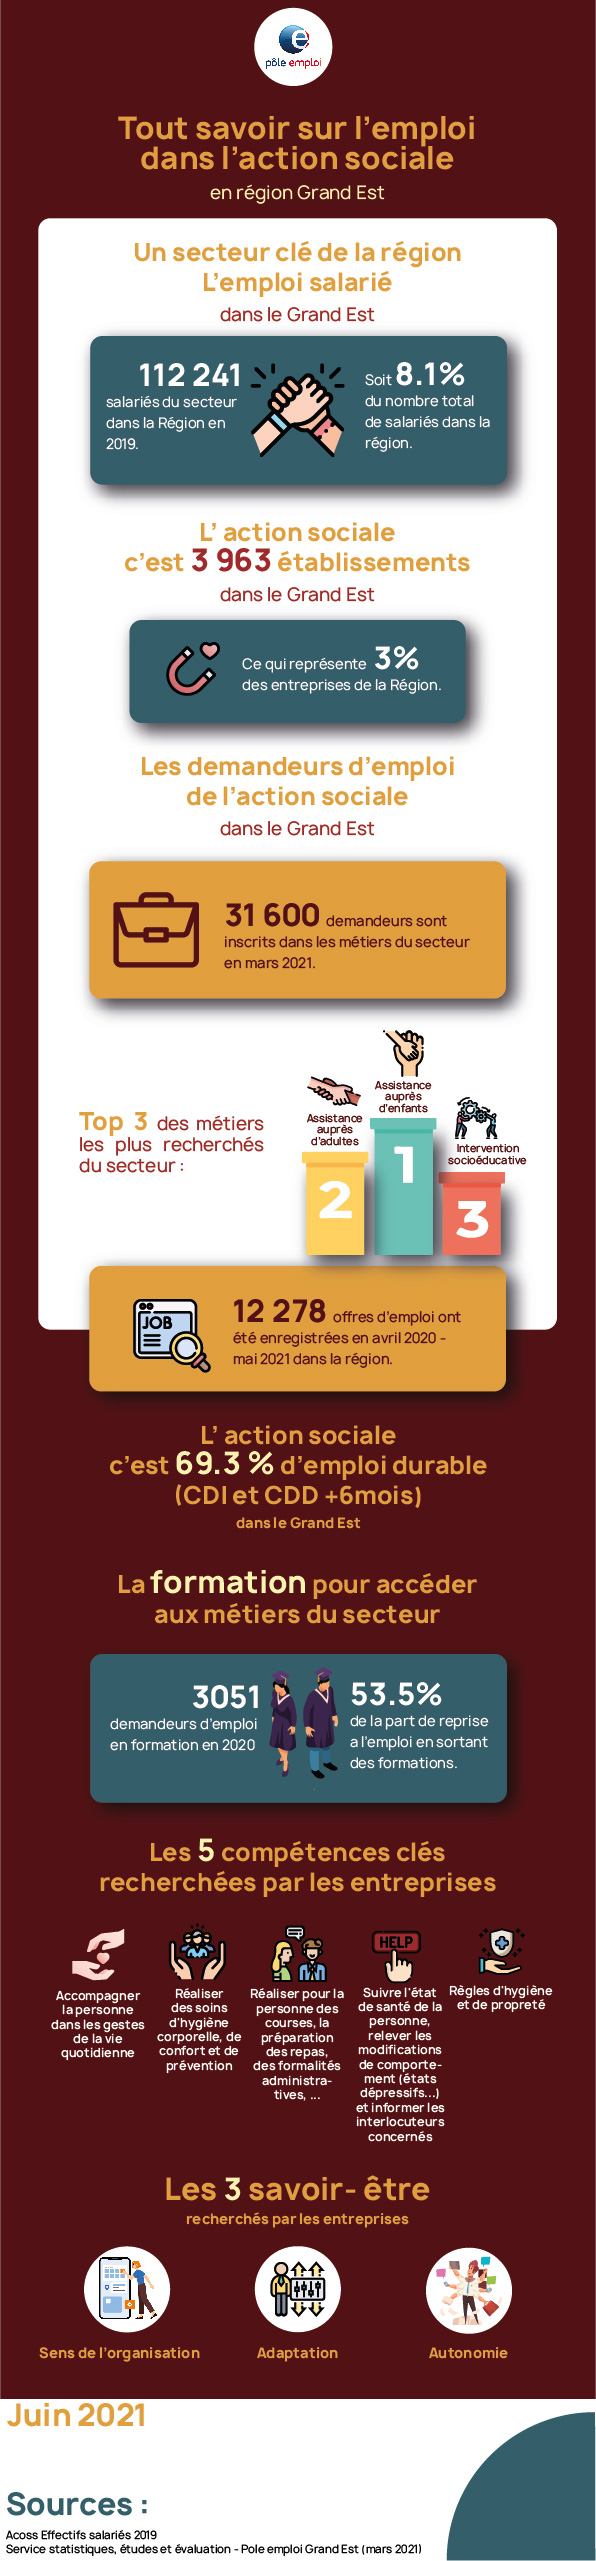 Infographie Action Sociale.jpg (Infographie Action Sociale)